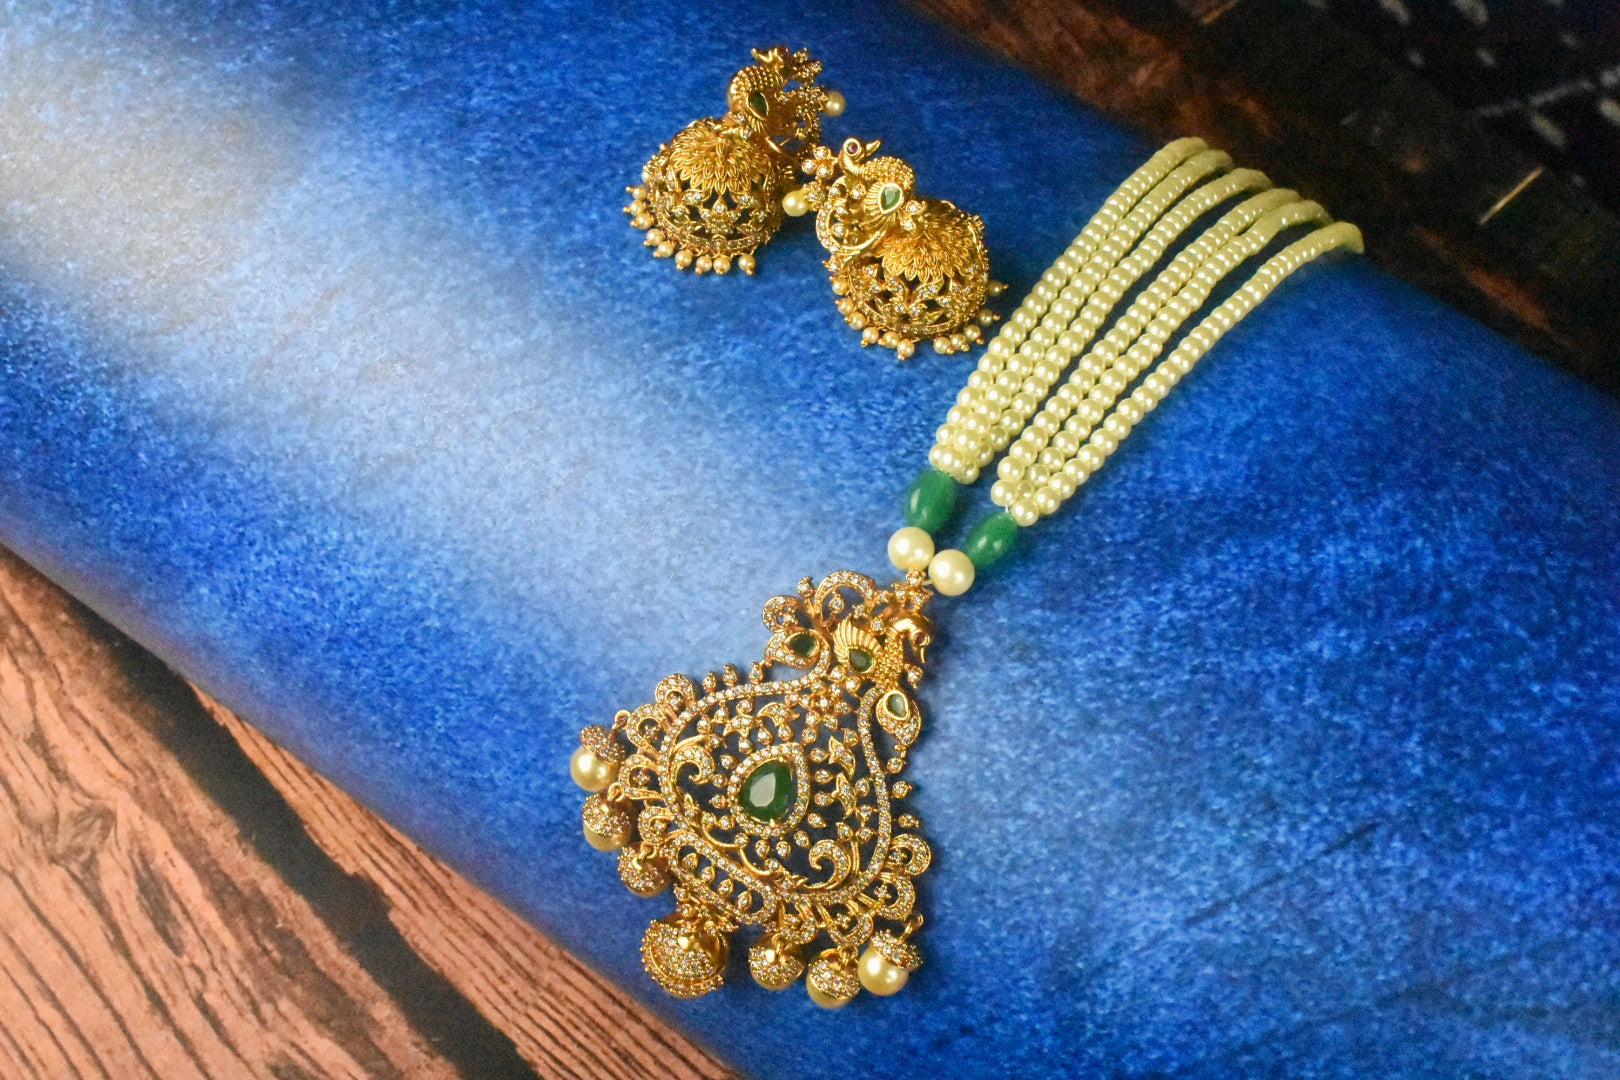 Antique Peacock Pendant With Pearls Necklace By Asp Fashion Jewellery 